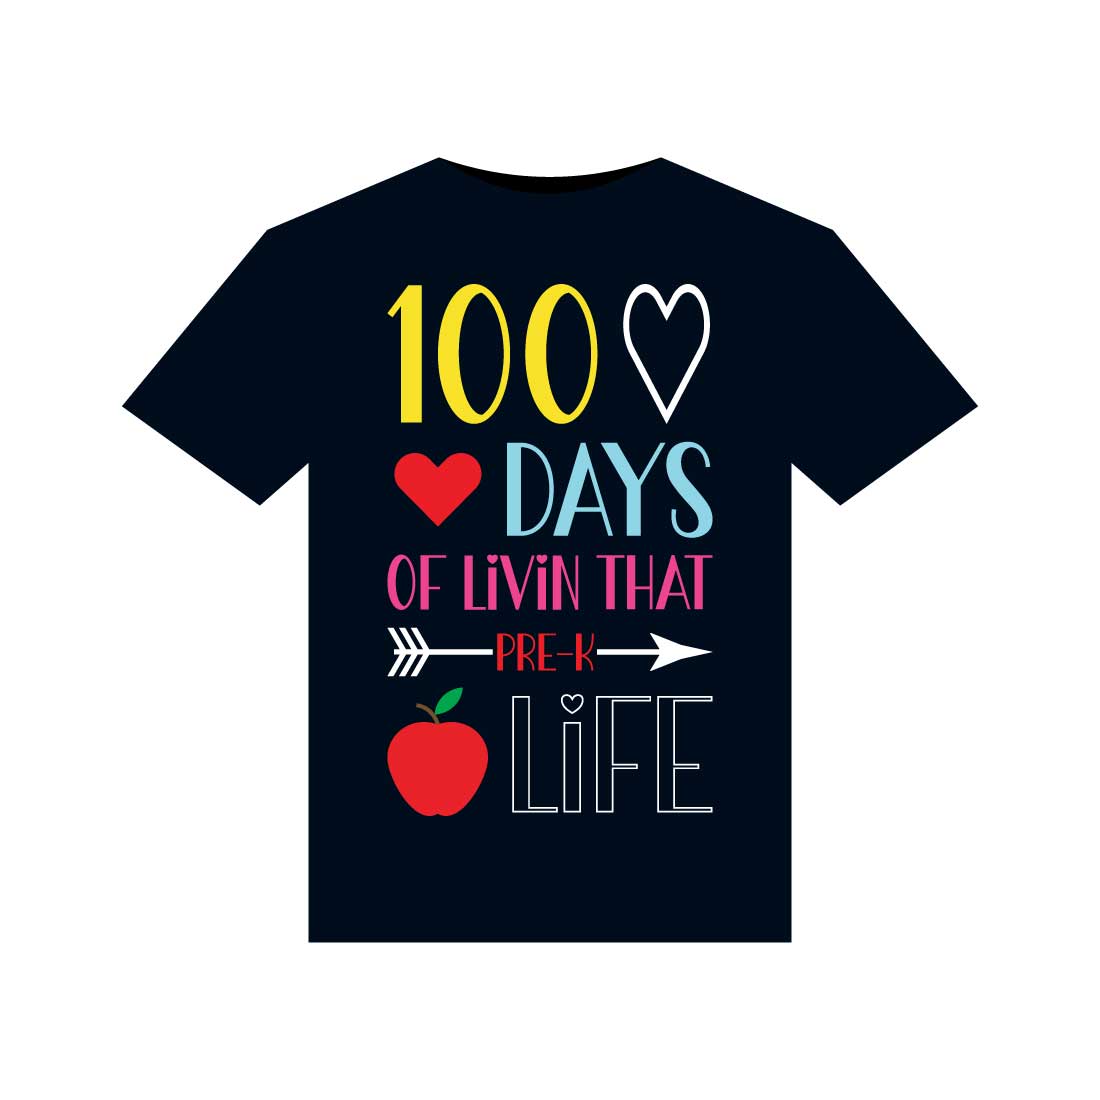 100 Days Of School T-Shirts Design preview image.